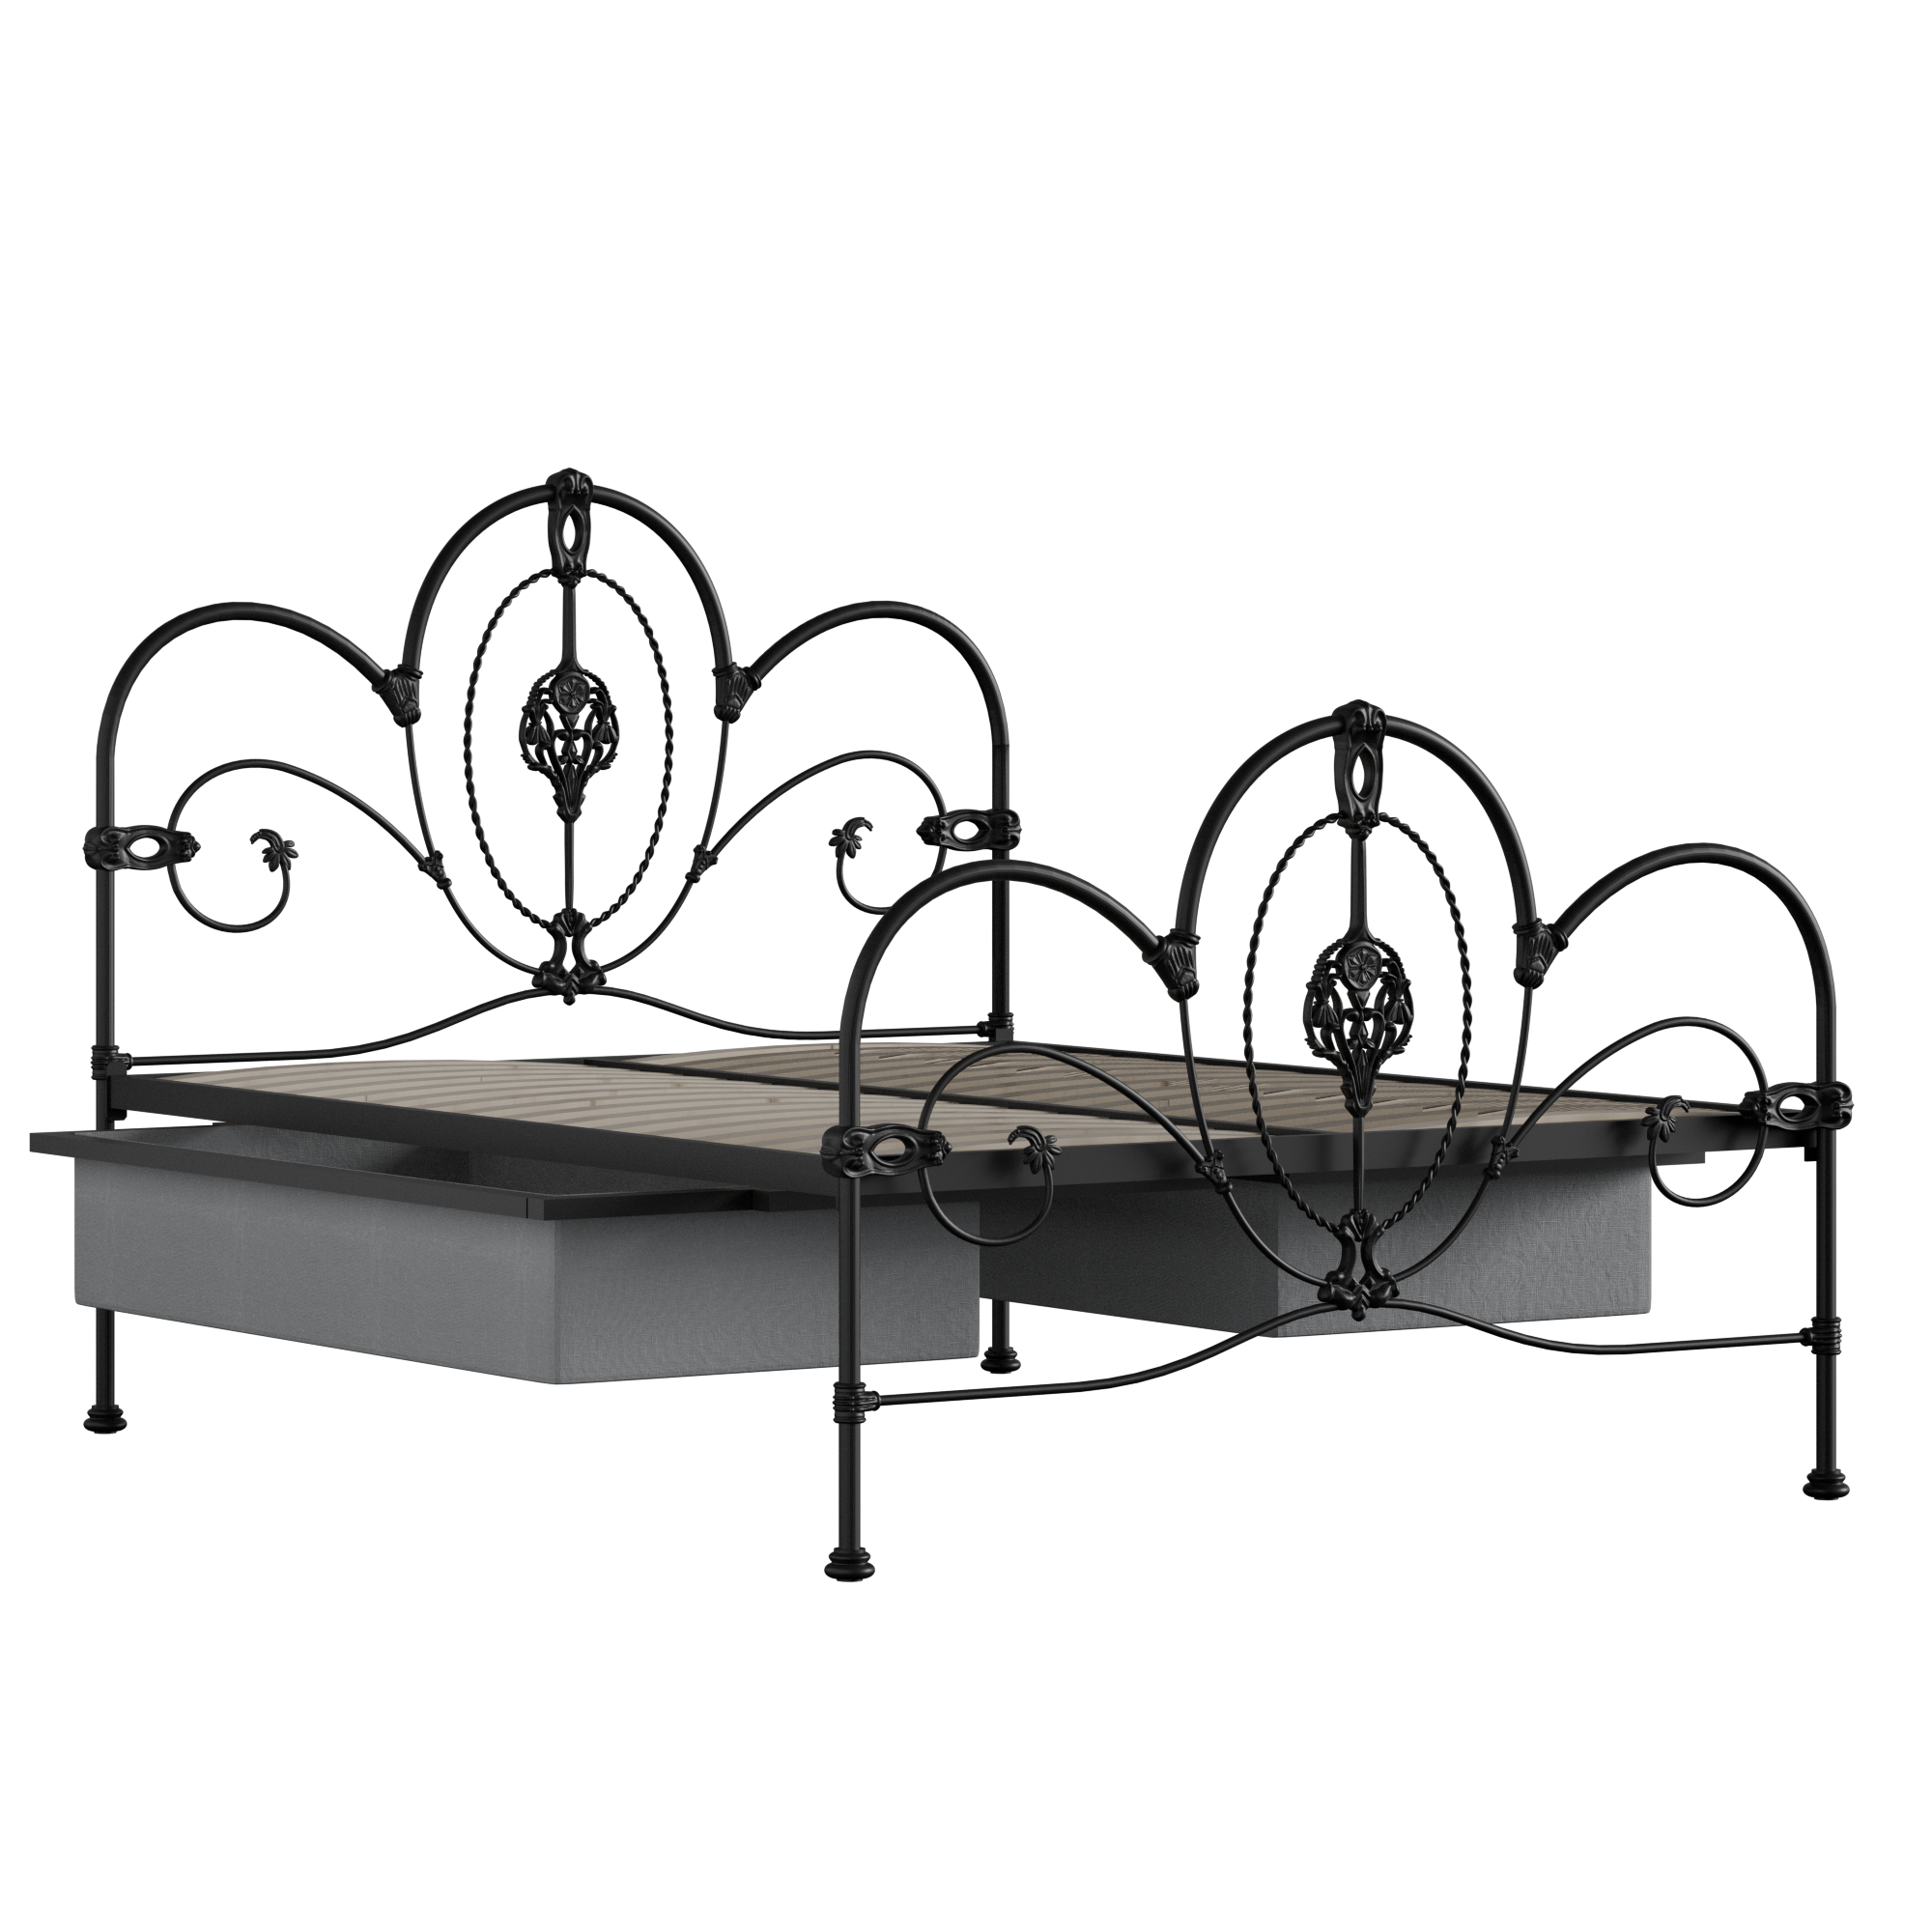 Ballina iron/metal bed in black with drawers